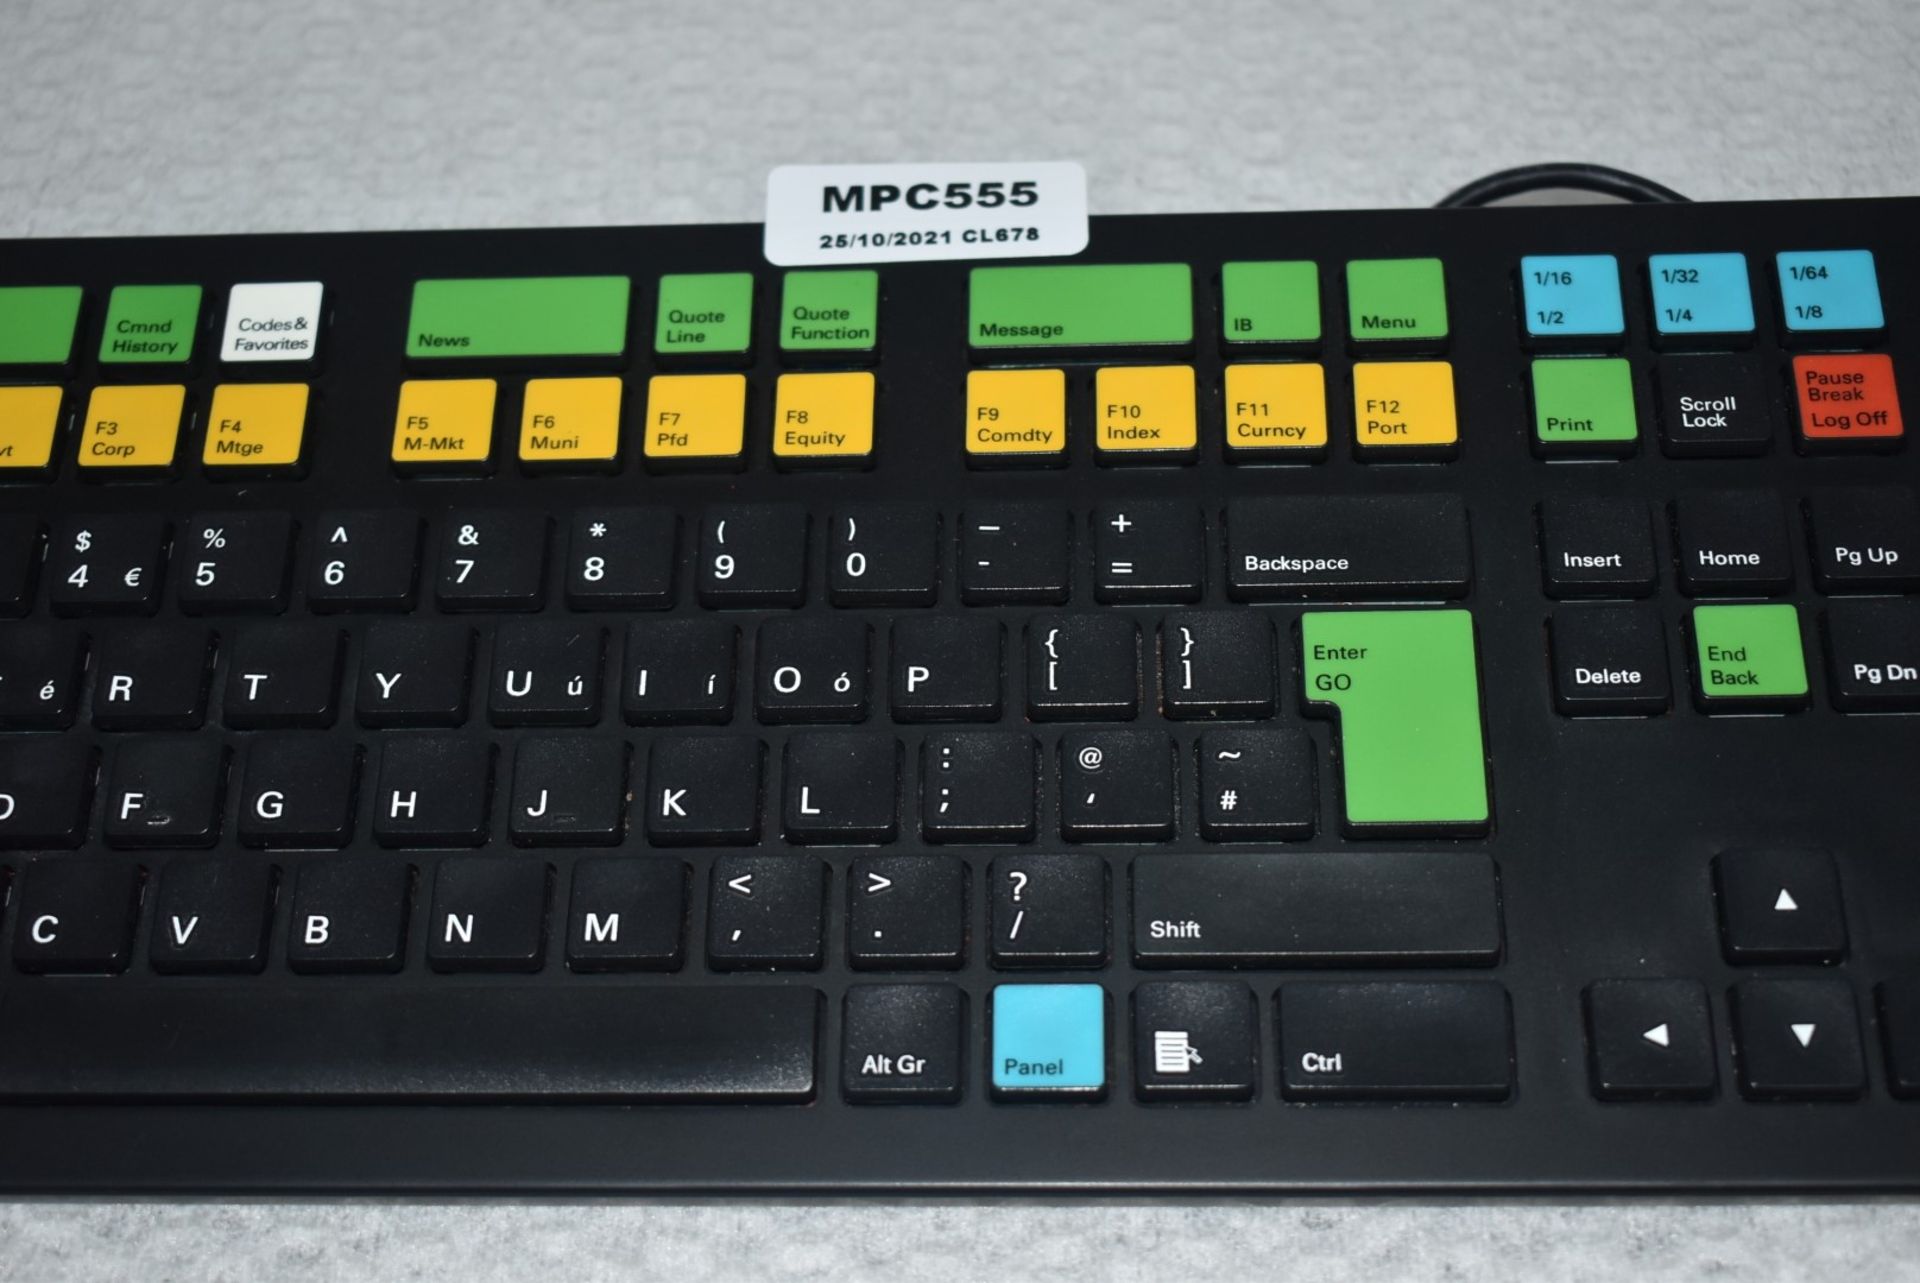 1 x Bloomberg STB100 Financial/Trading Keyboard with Fingerprint Scanner - Ref: MPC555 CG - - Image 4 of 4